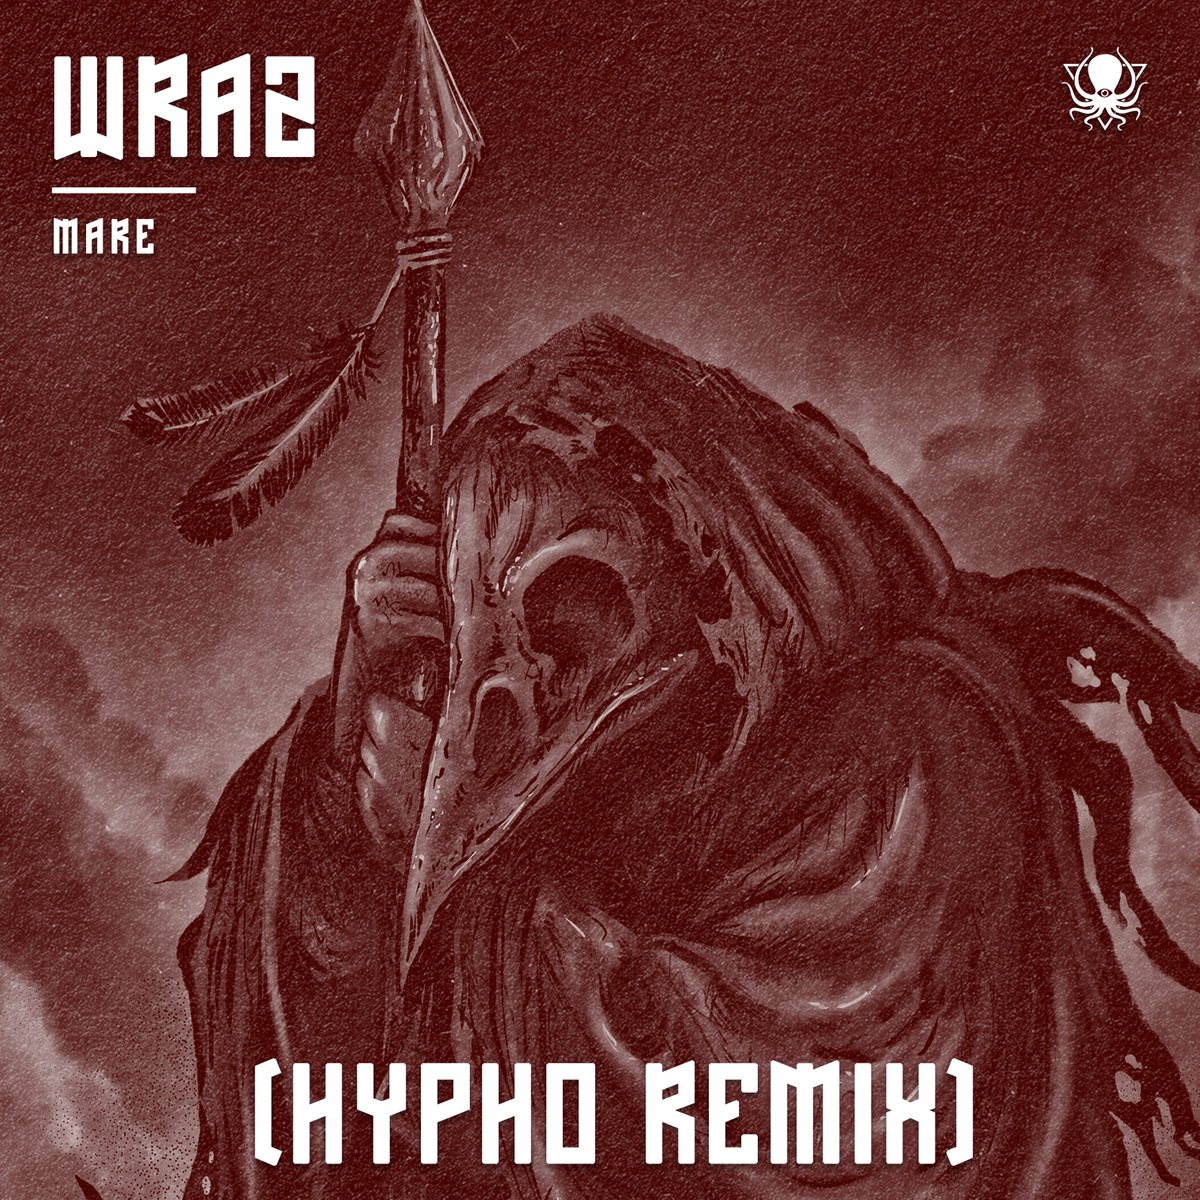 Today we drop the might @HyphoLouis remix of @wraz_dubs - Mare! This one's a hybrid between a subscriber exclusive and a full release. Available exclusively to our subscribers in download form, while being available for streaming on all platforms!